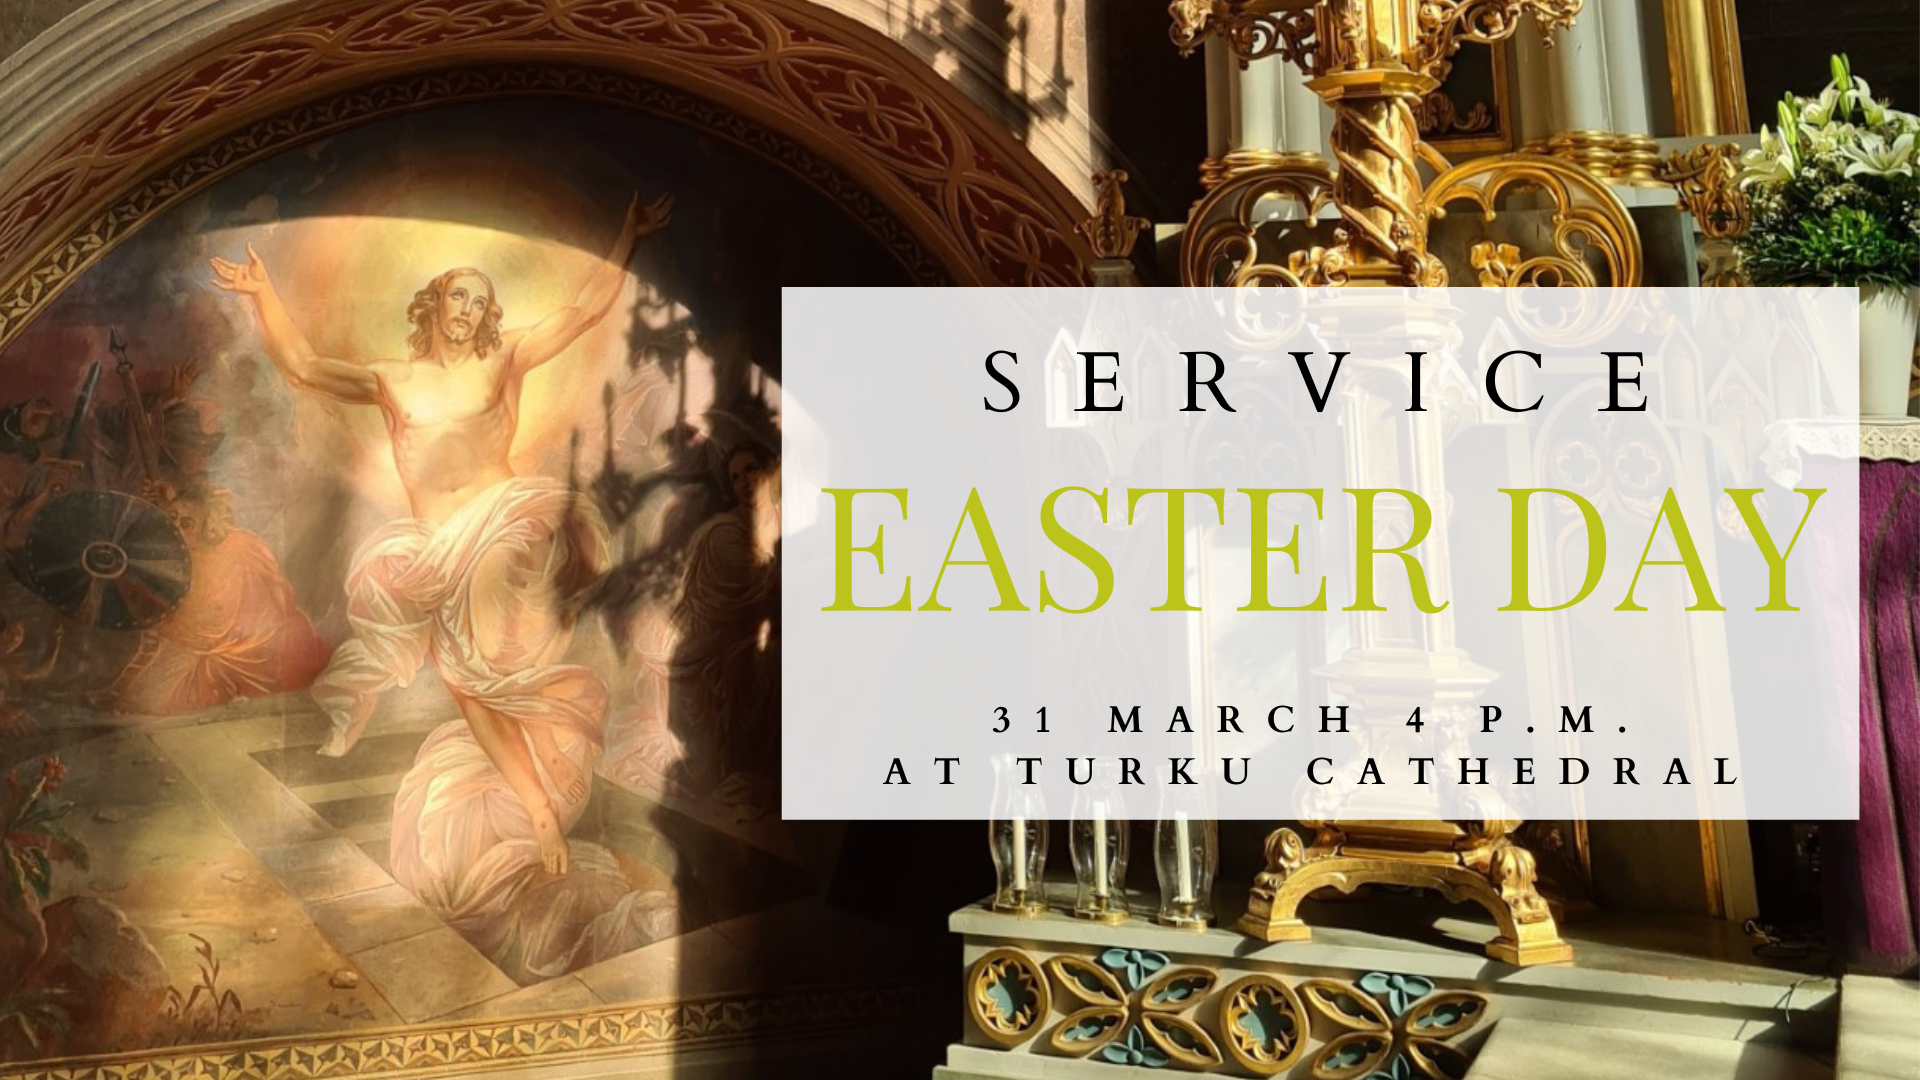 Service at Turku Cathedral - Easter Day